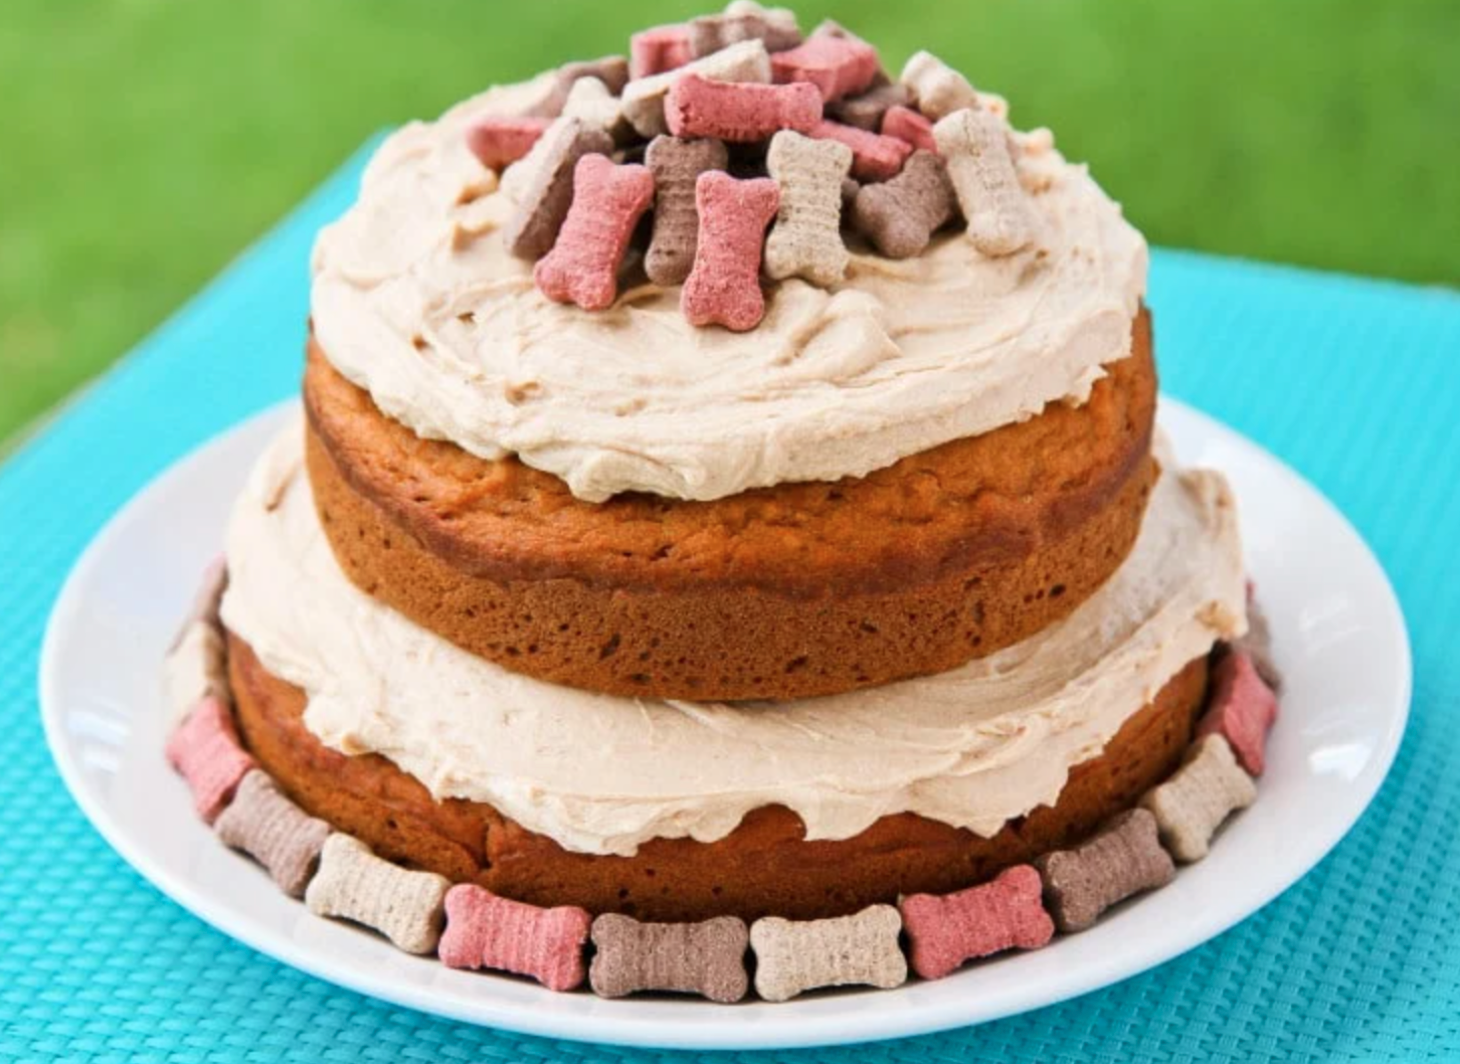 Celebrate #50 With Us: Bake Your Pup a Delicious Cake!